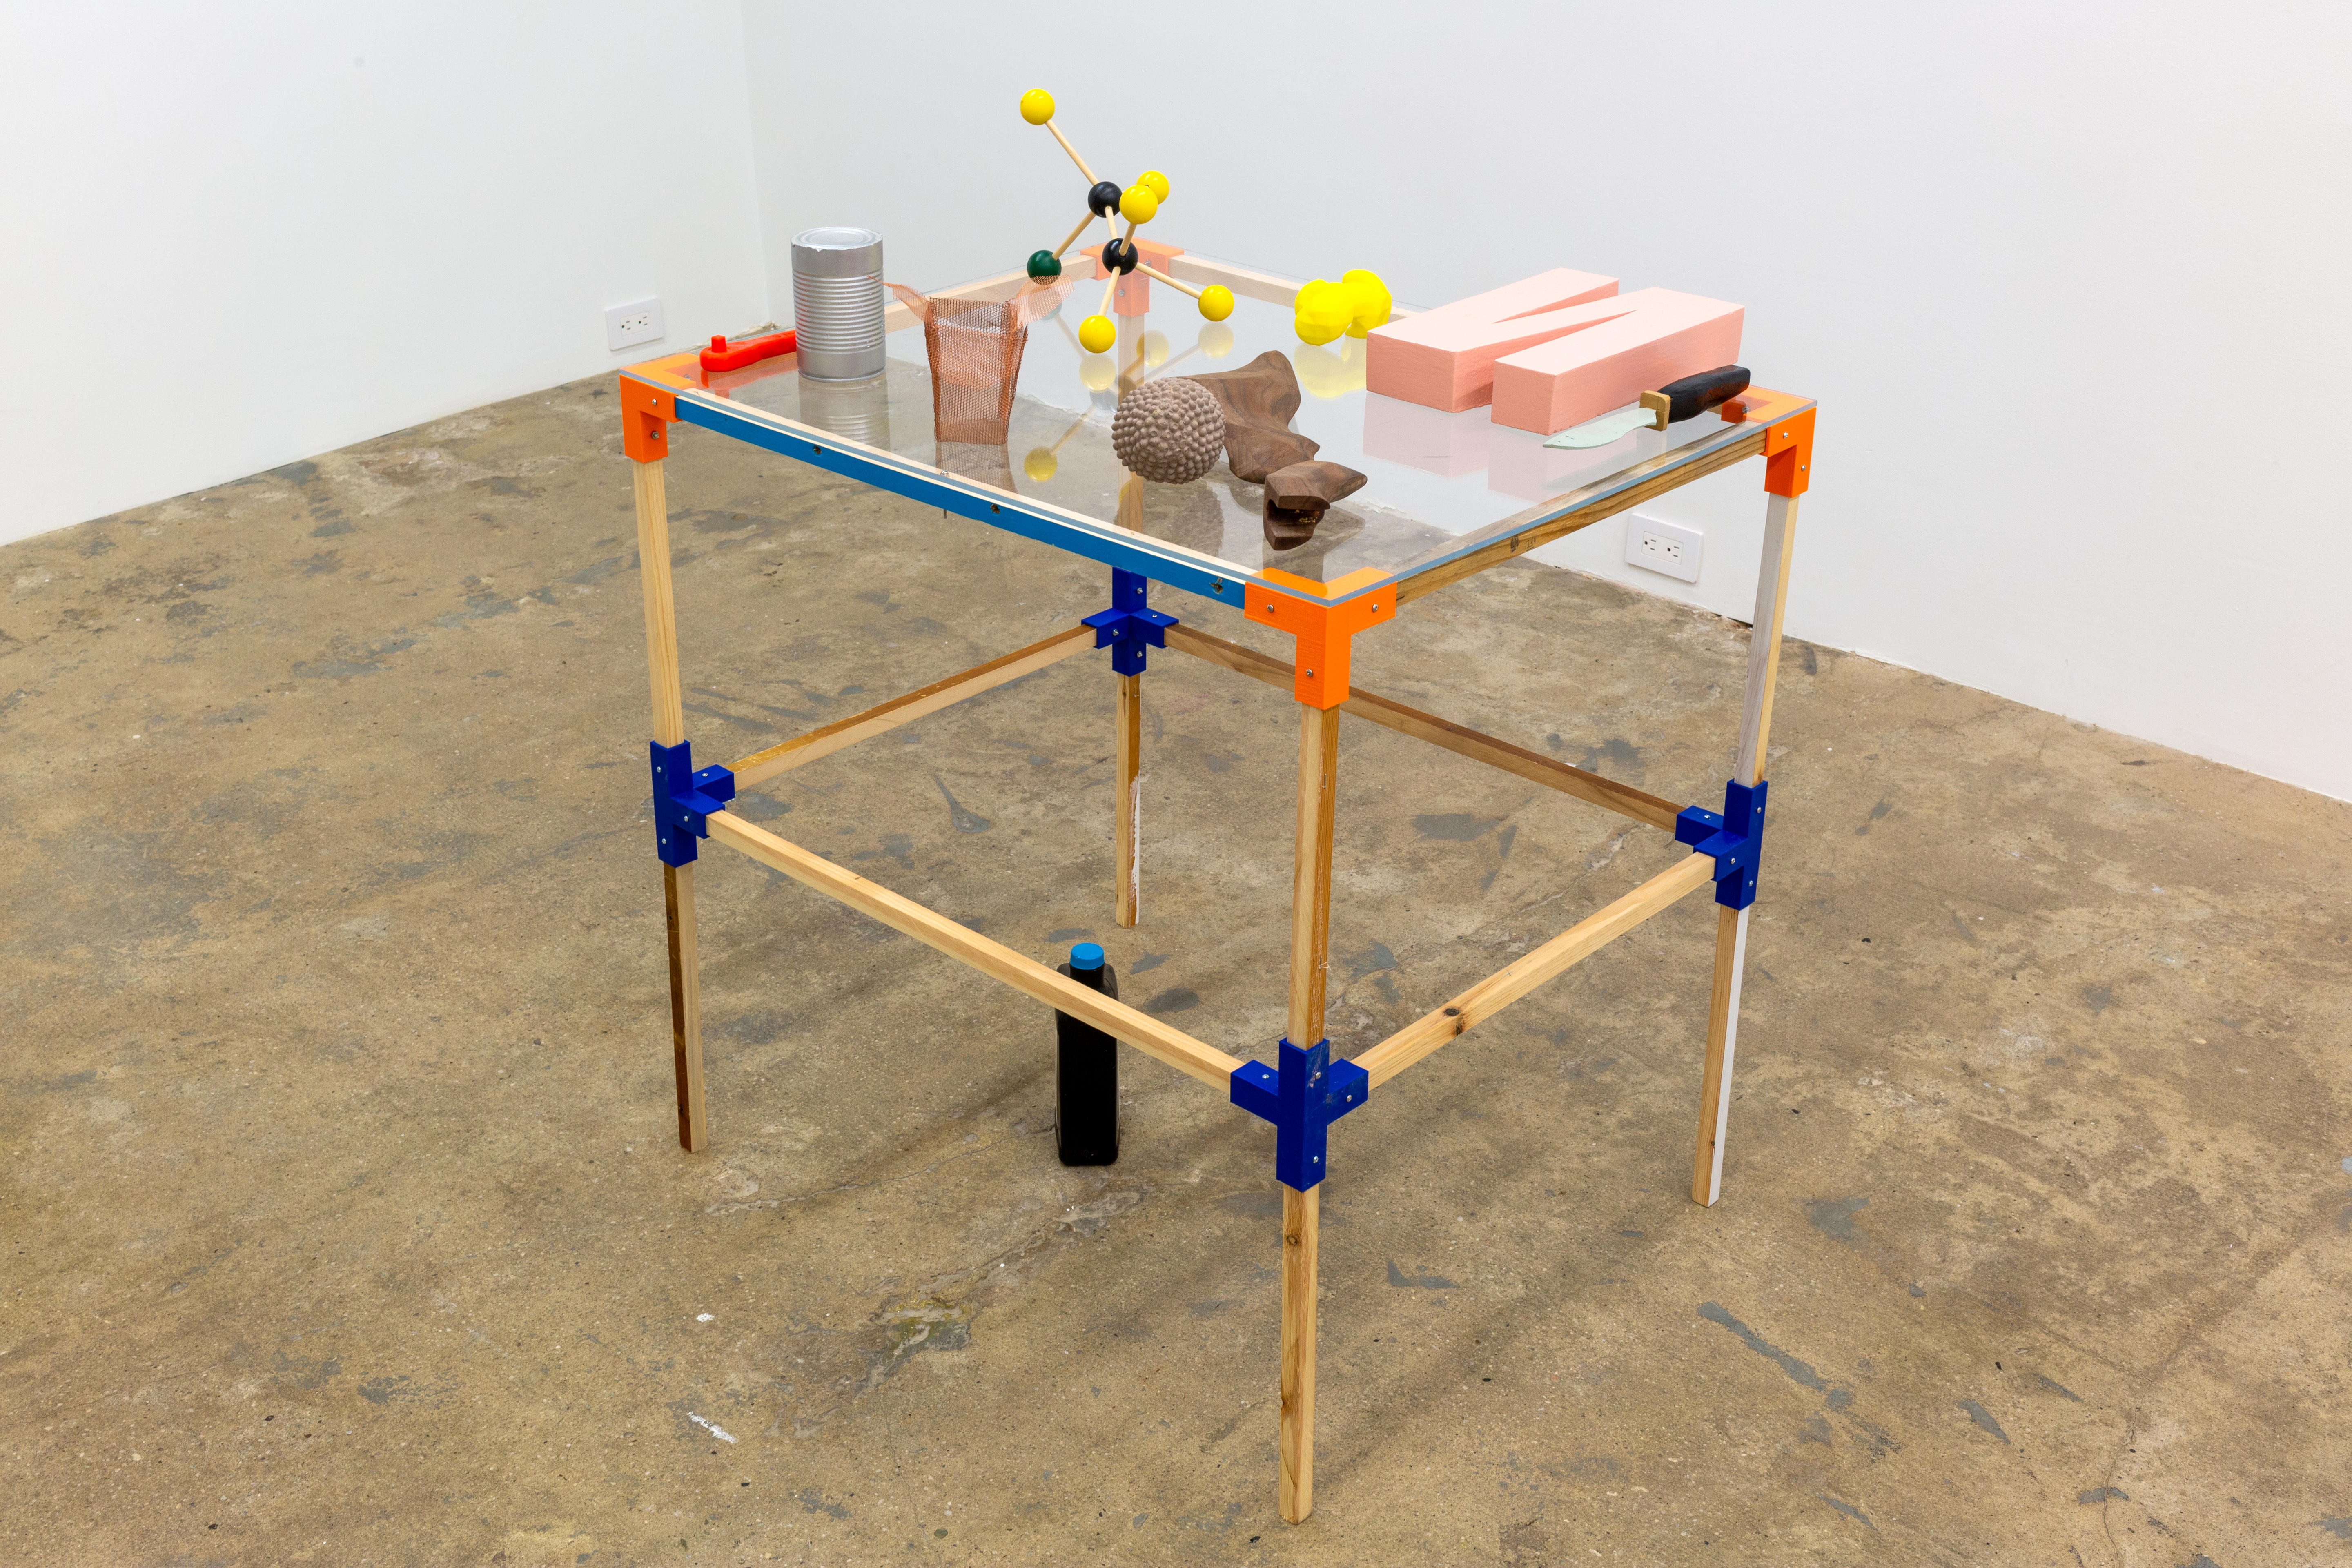 Maximilian Goldfarb, Transmitter: Small Object Array (Table II), 2021, Various handmade and fabricated objects on display table made of printed plastic connectors,, wood spans, hardware, plexi, 30h x 24w x 30d in.